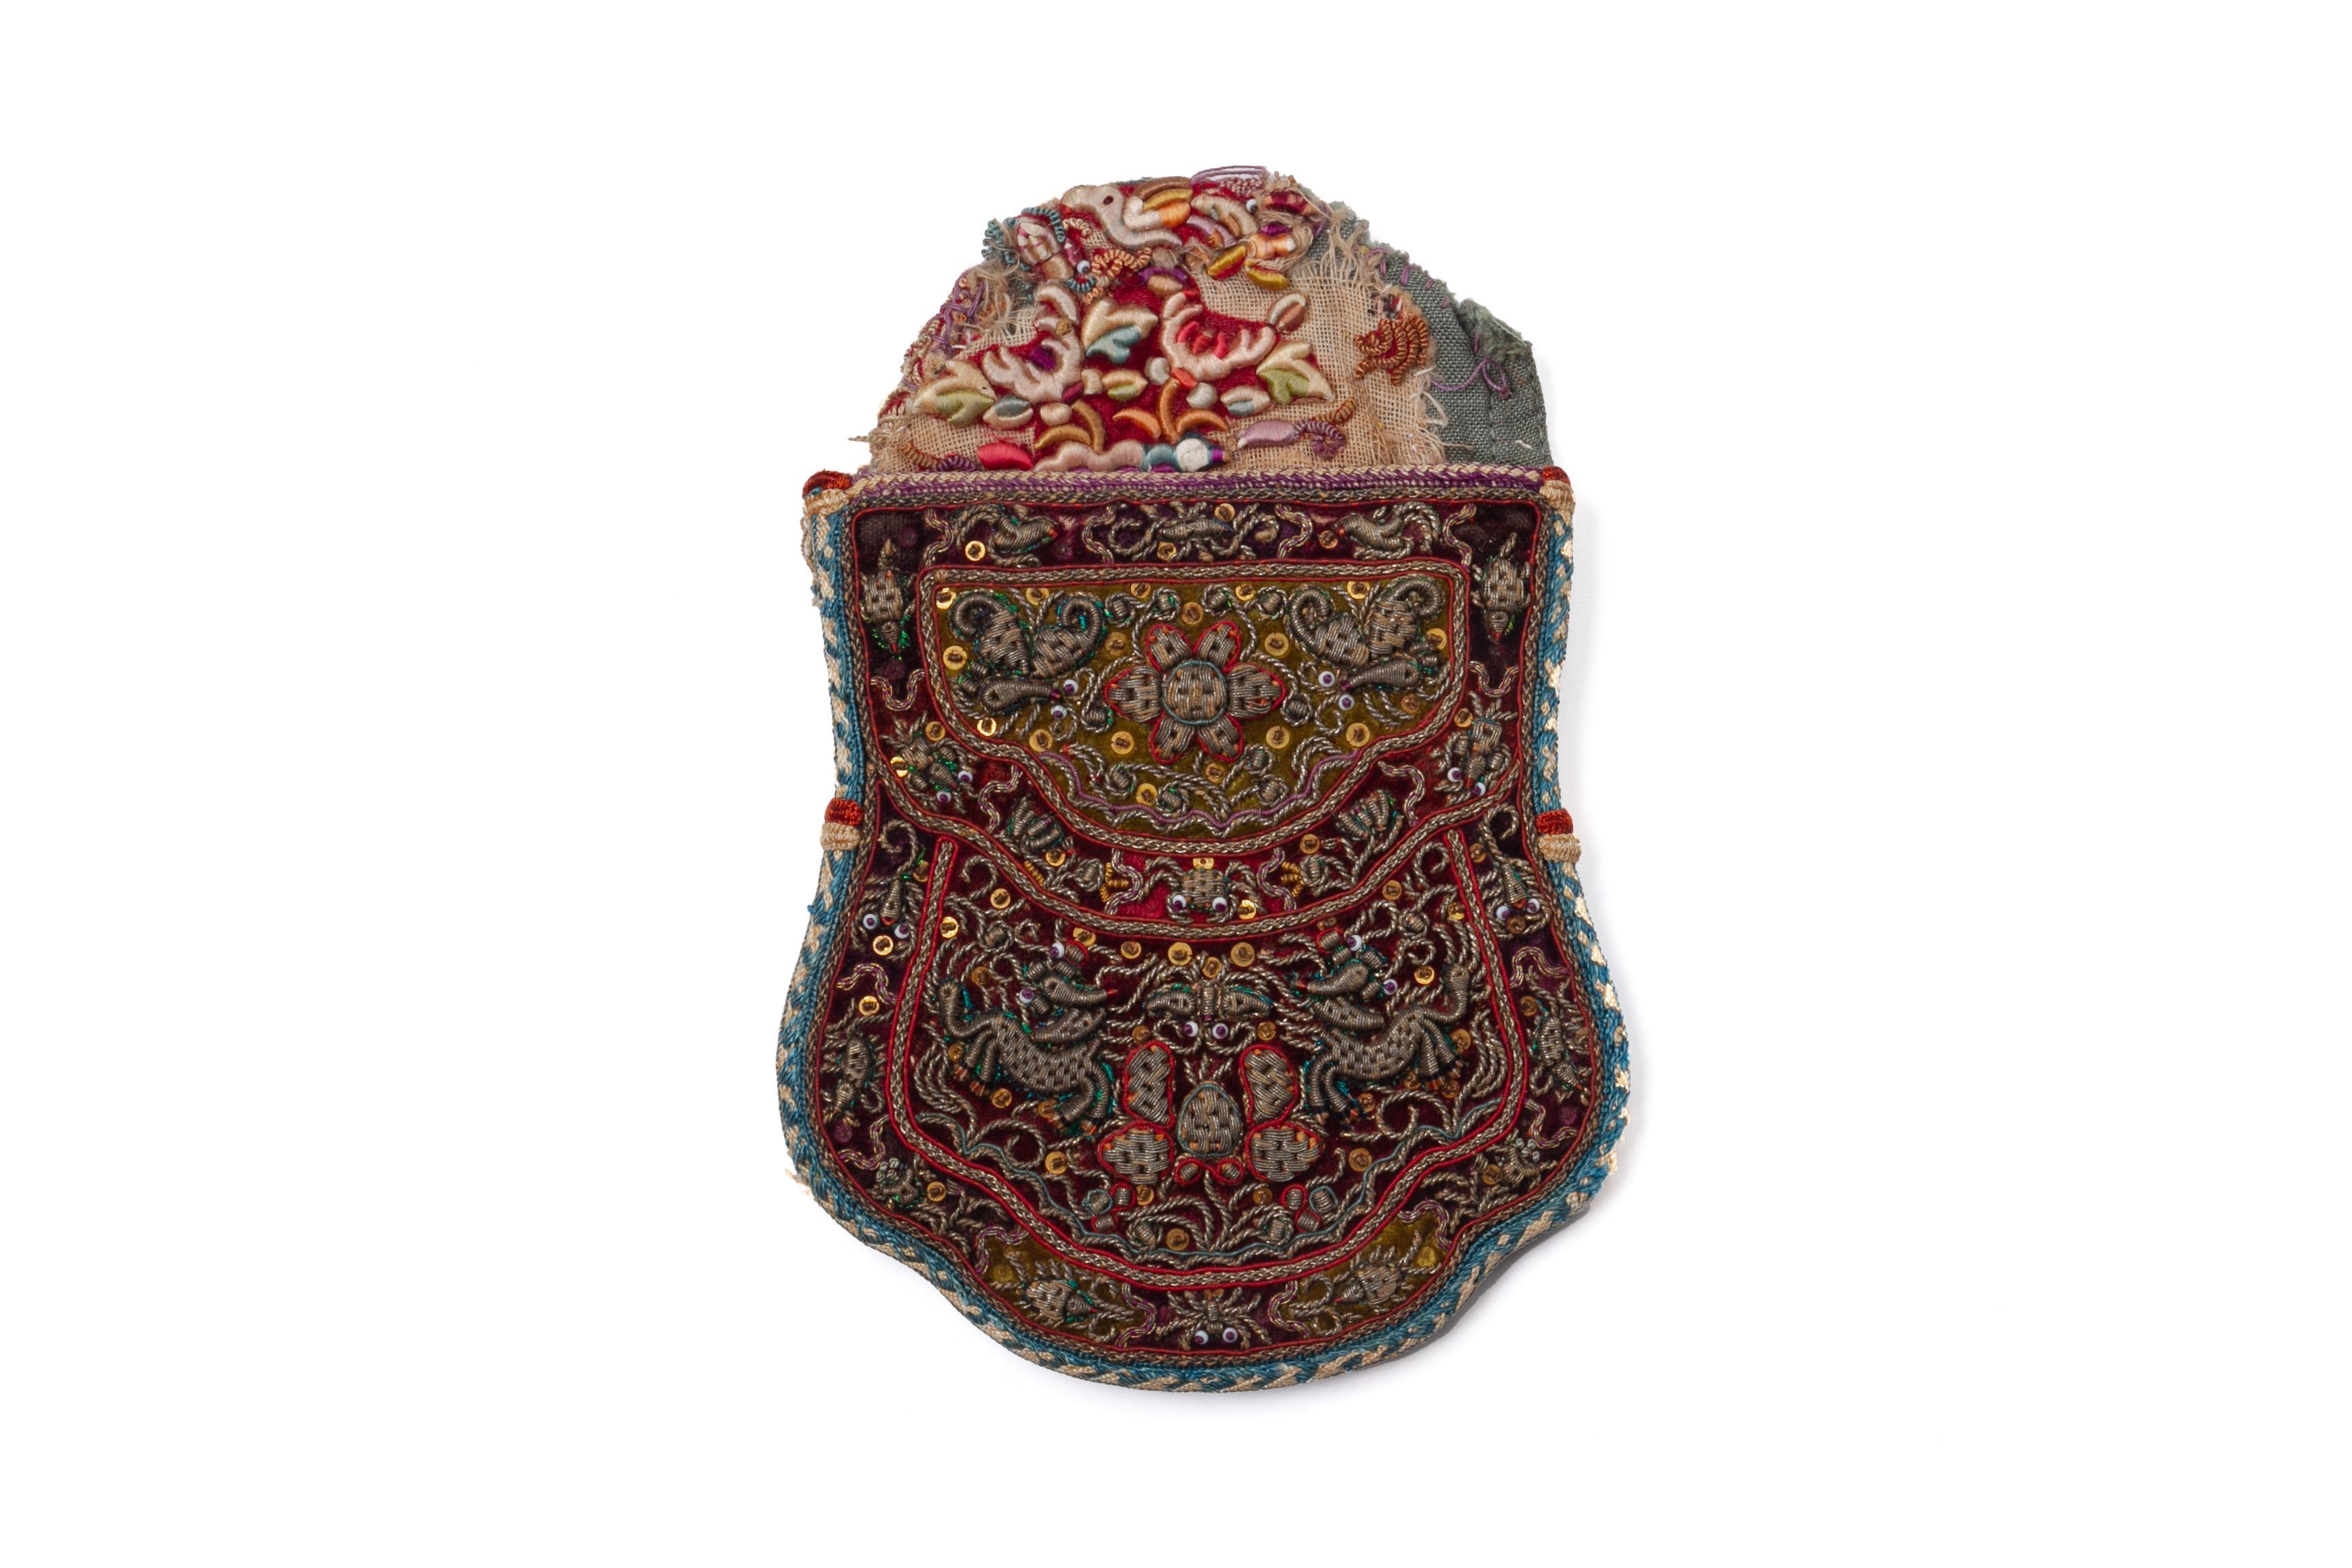 AN EMBROIDERED CEREMONIAL PURSE